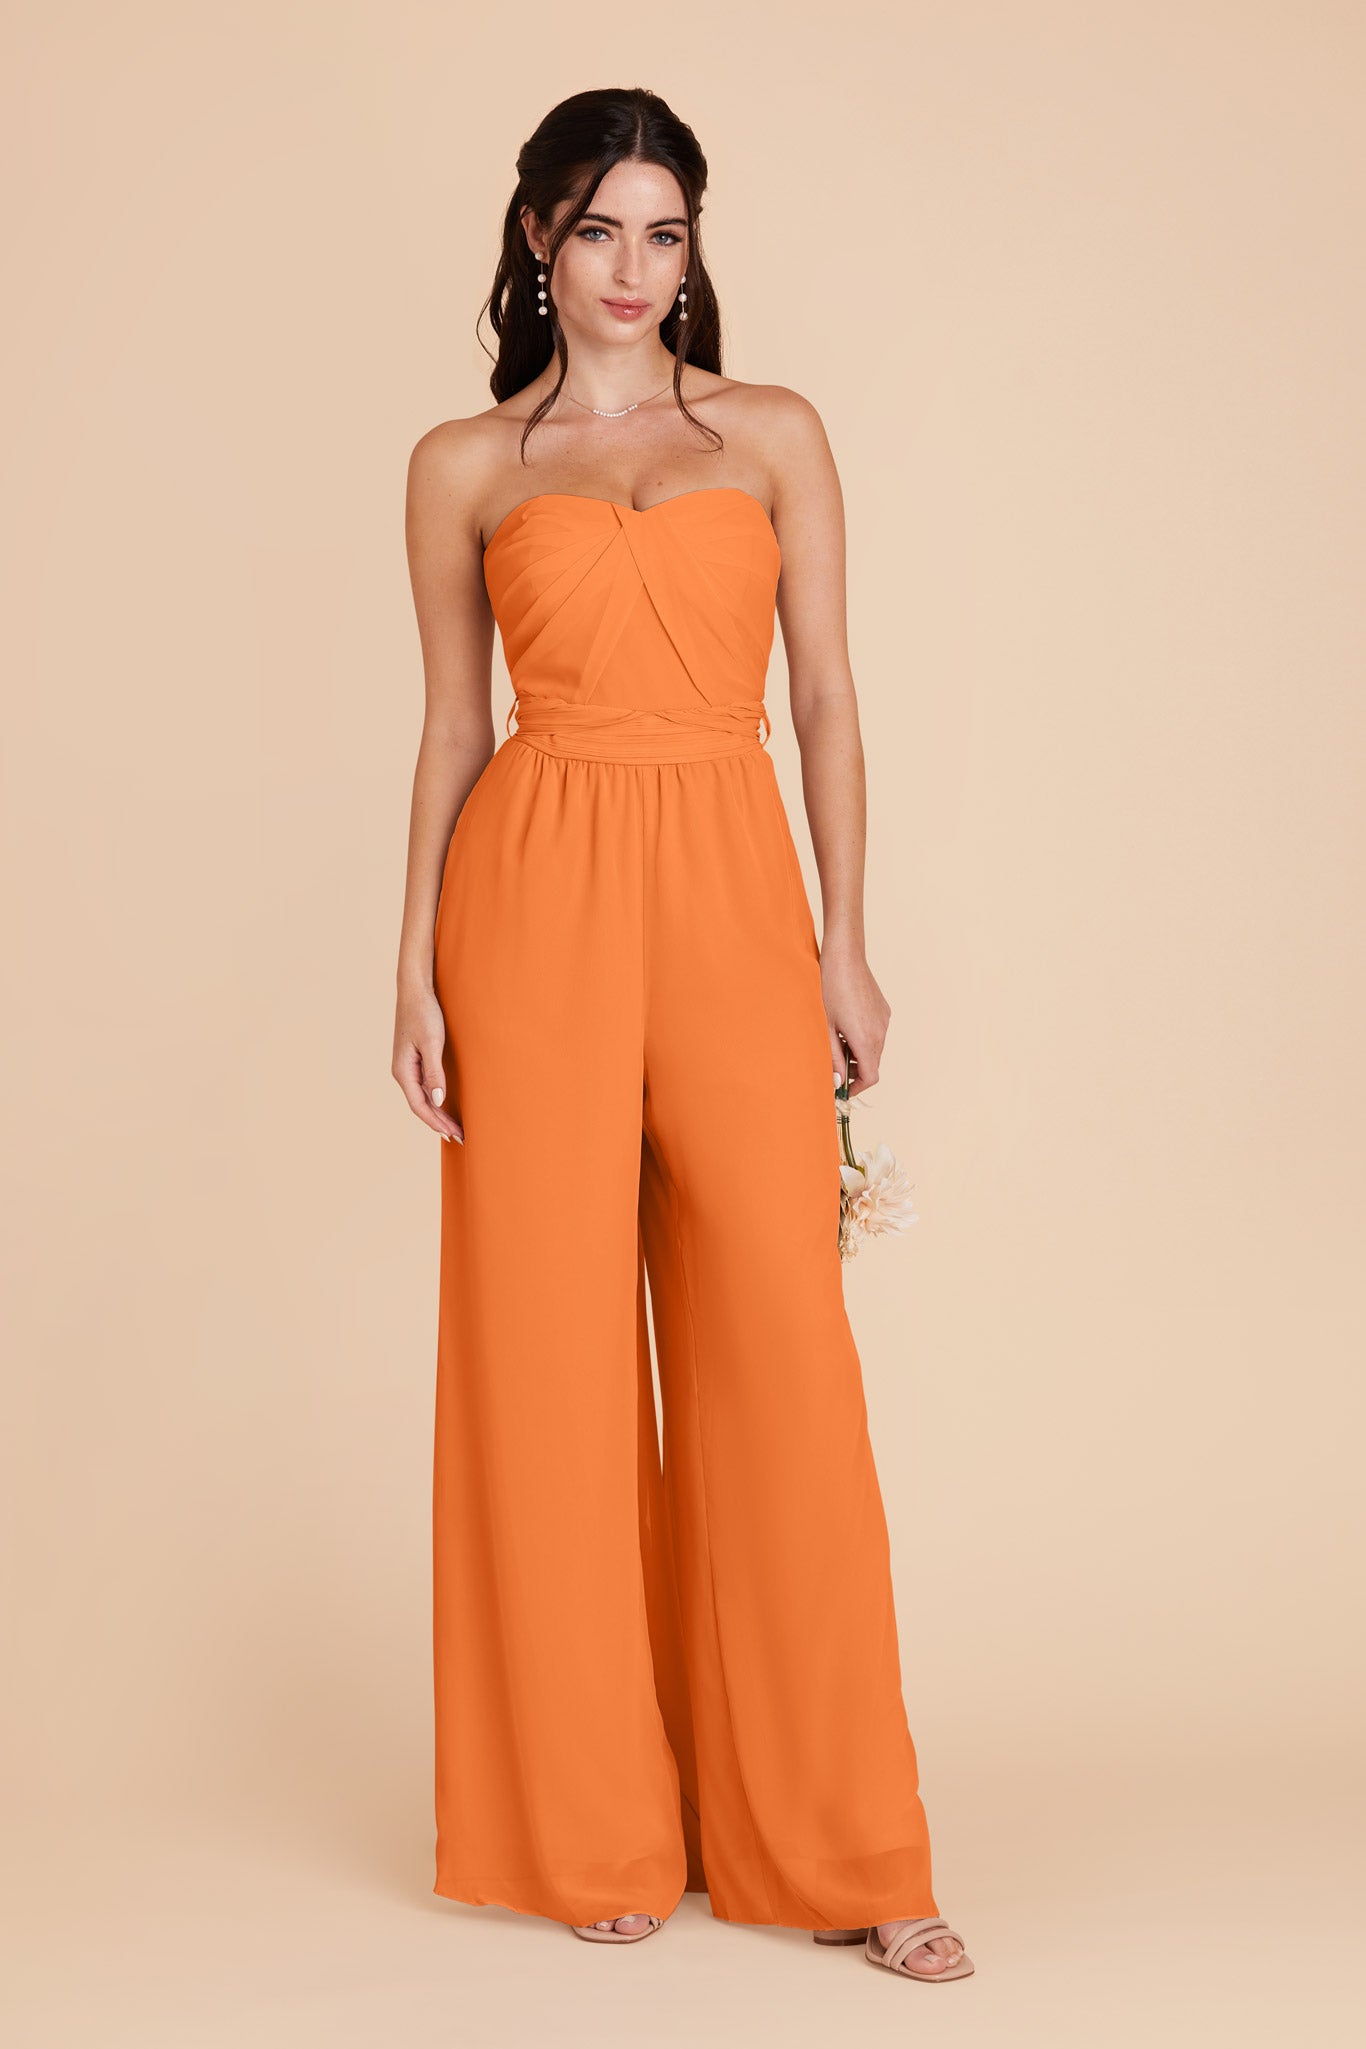 Apricot Gigi Convertible Jumpsuit by Birdy Grey